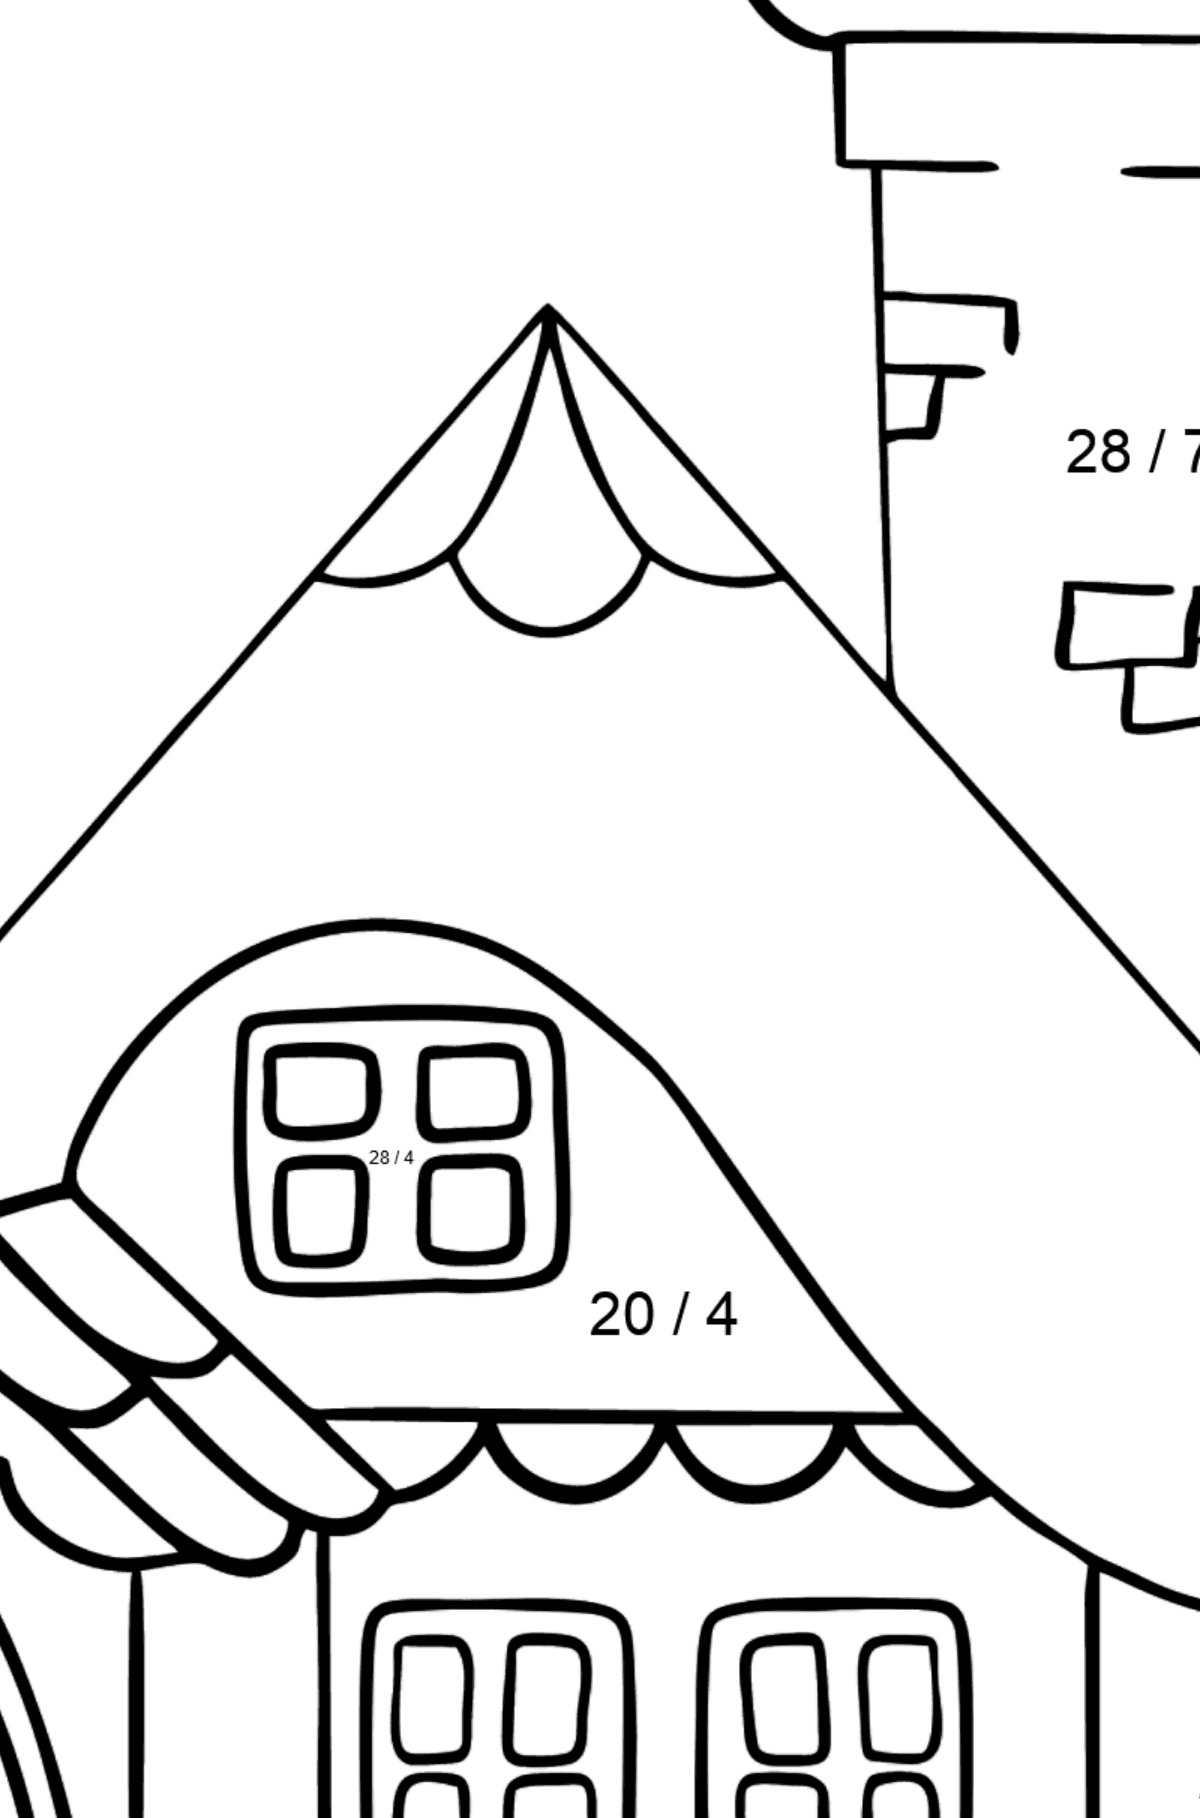 Simple Coloring Page - A Wonderful House - Math Coloring - Division for Kids